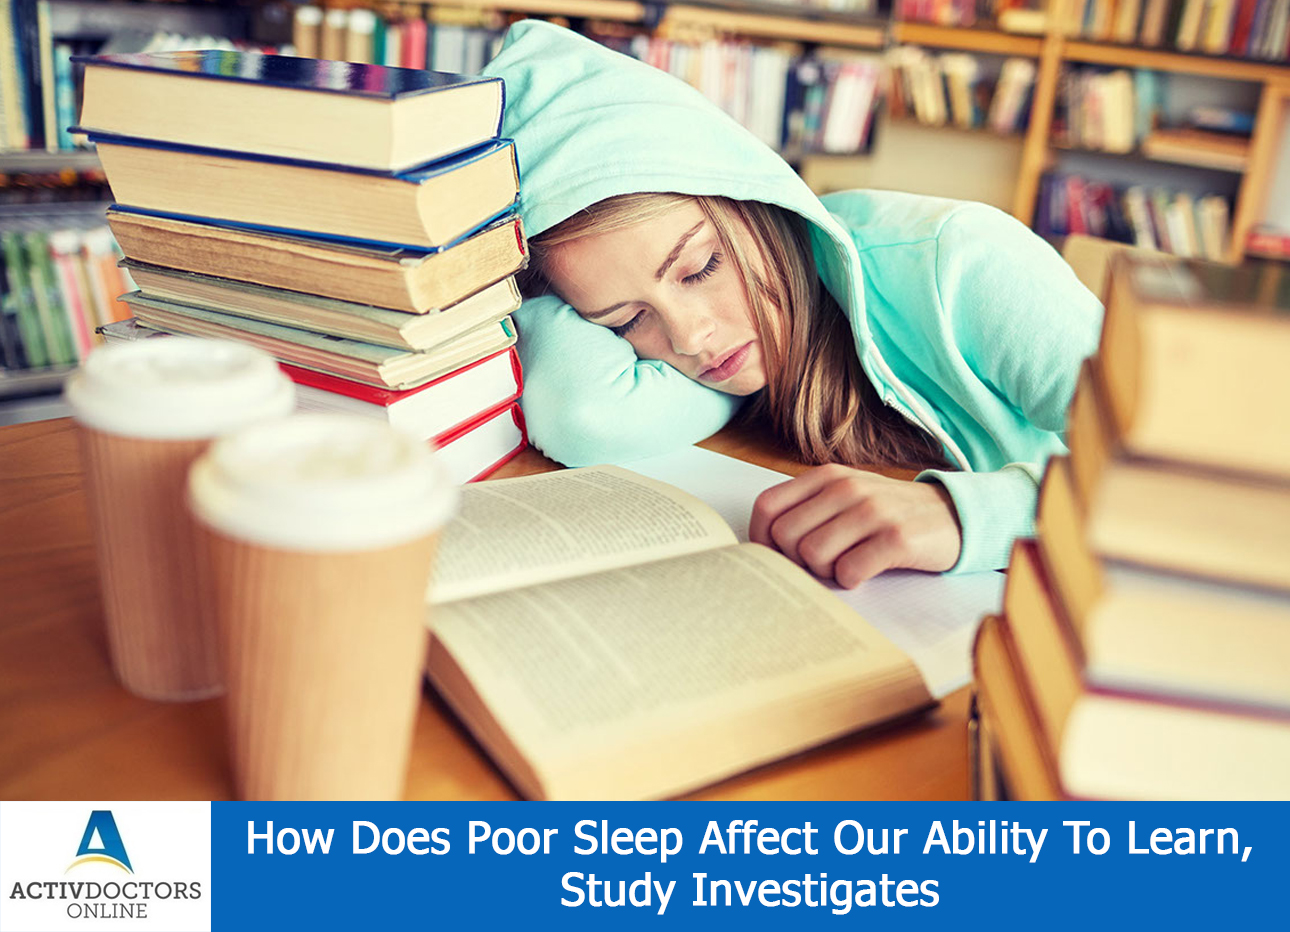 How Does Poor Sleep Affect Our Ability To Learn, Study Investigates